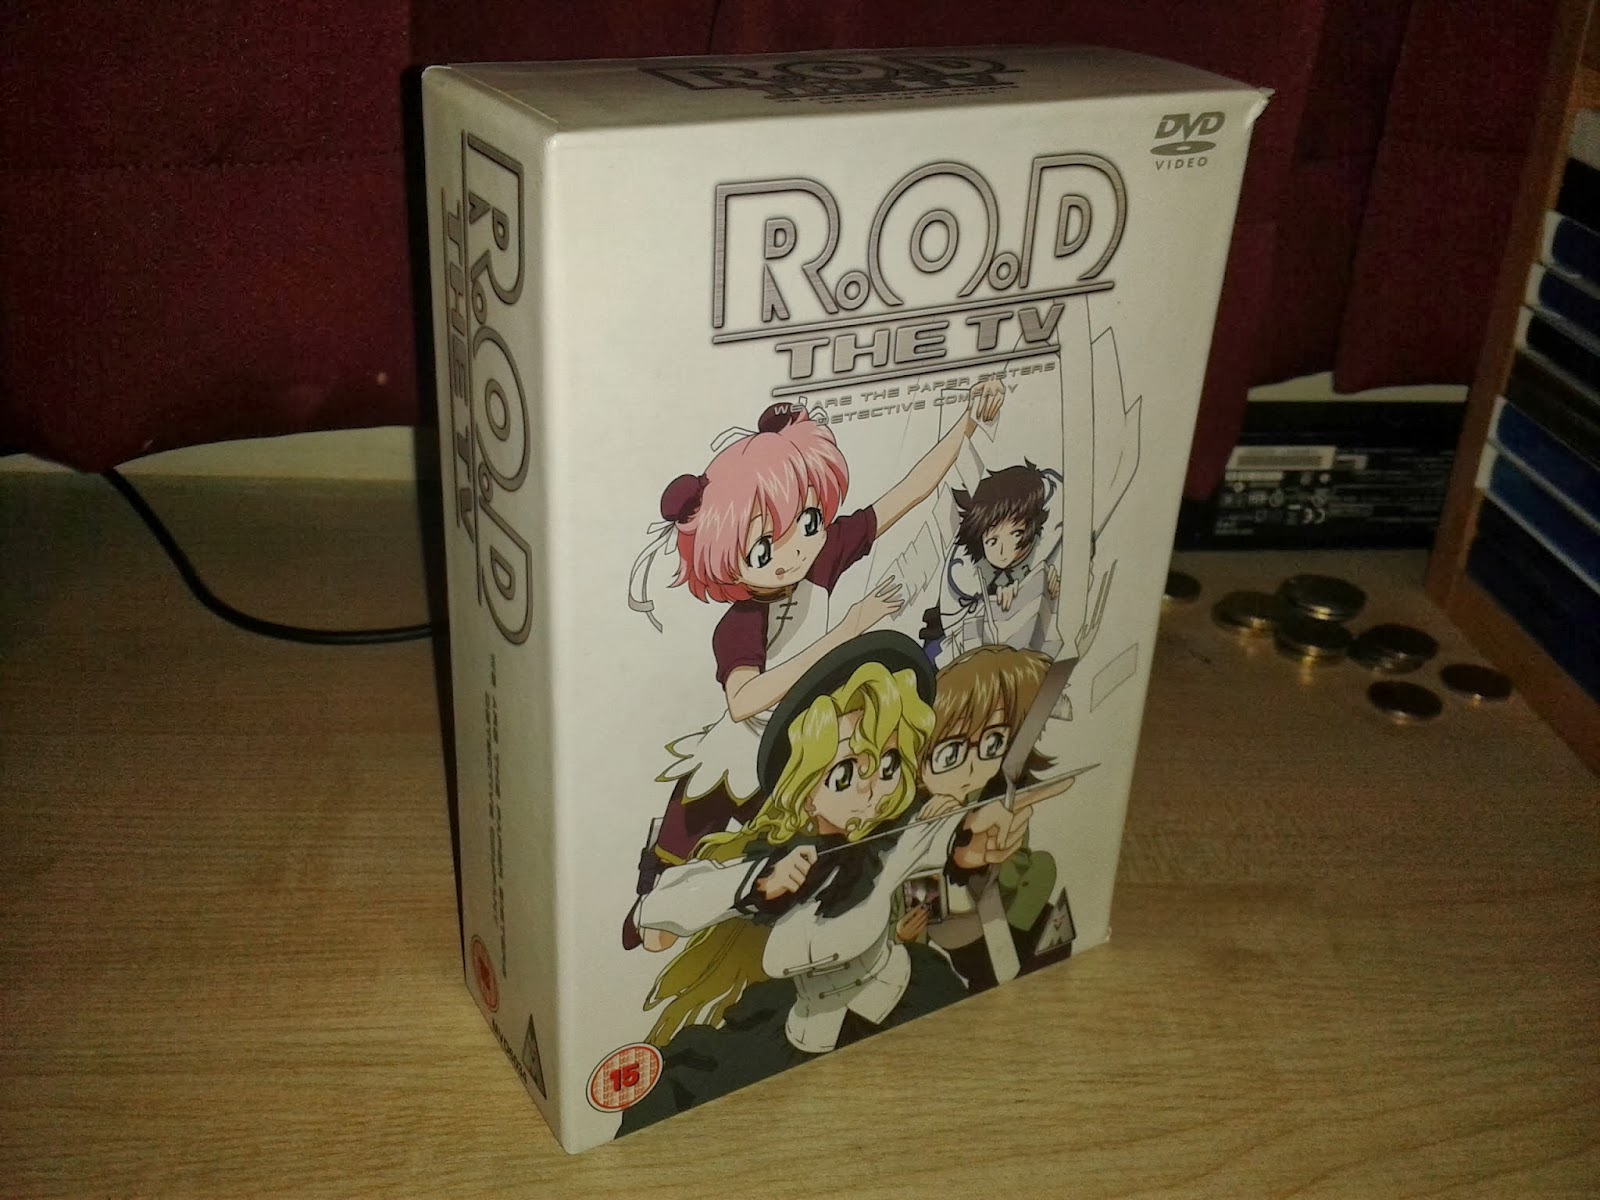 The Normanic Vault: Unboxing [UK]: R.O.D. The TV - Complete Series